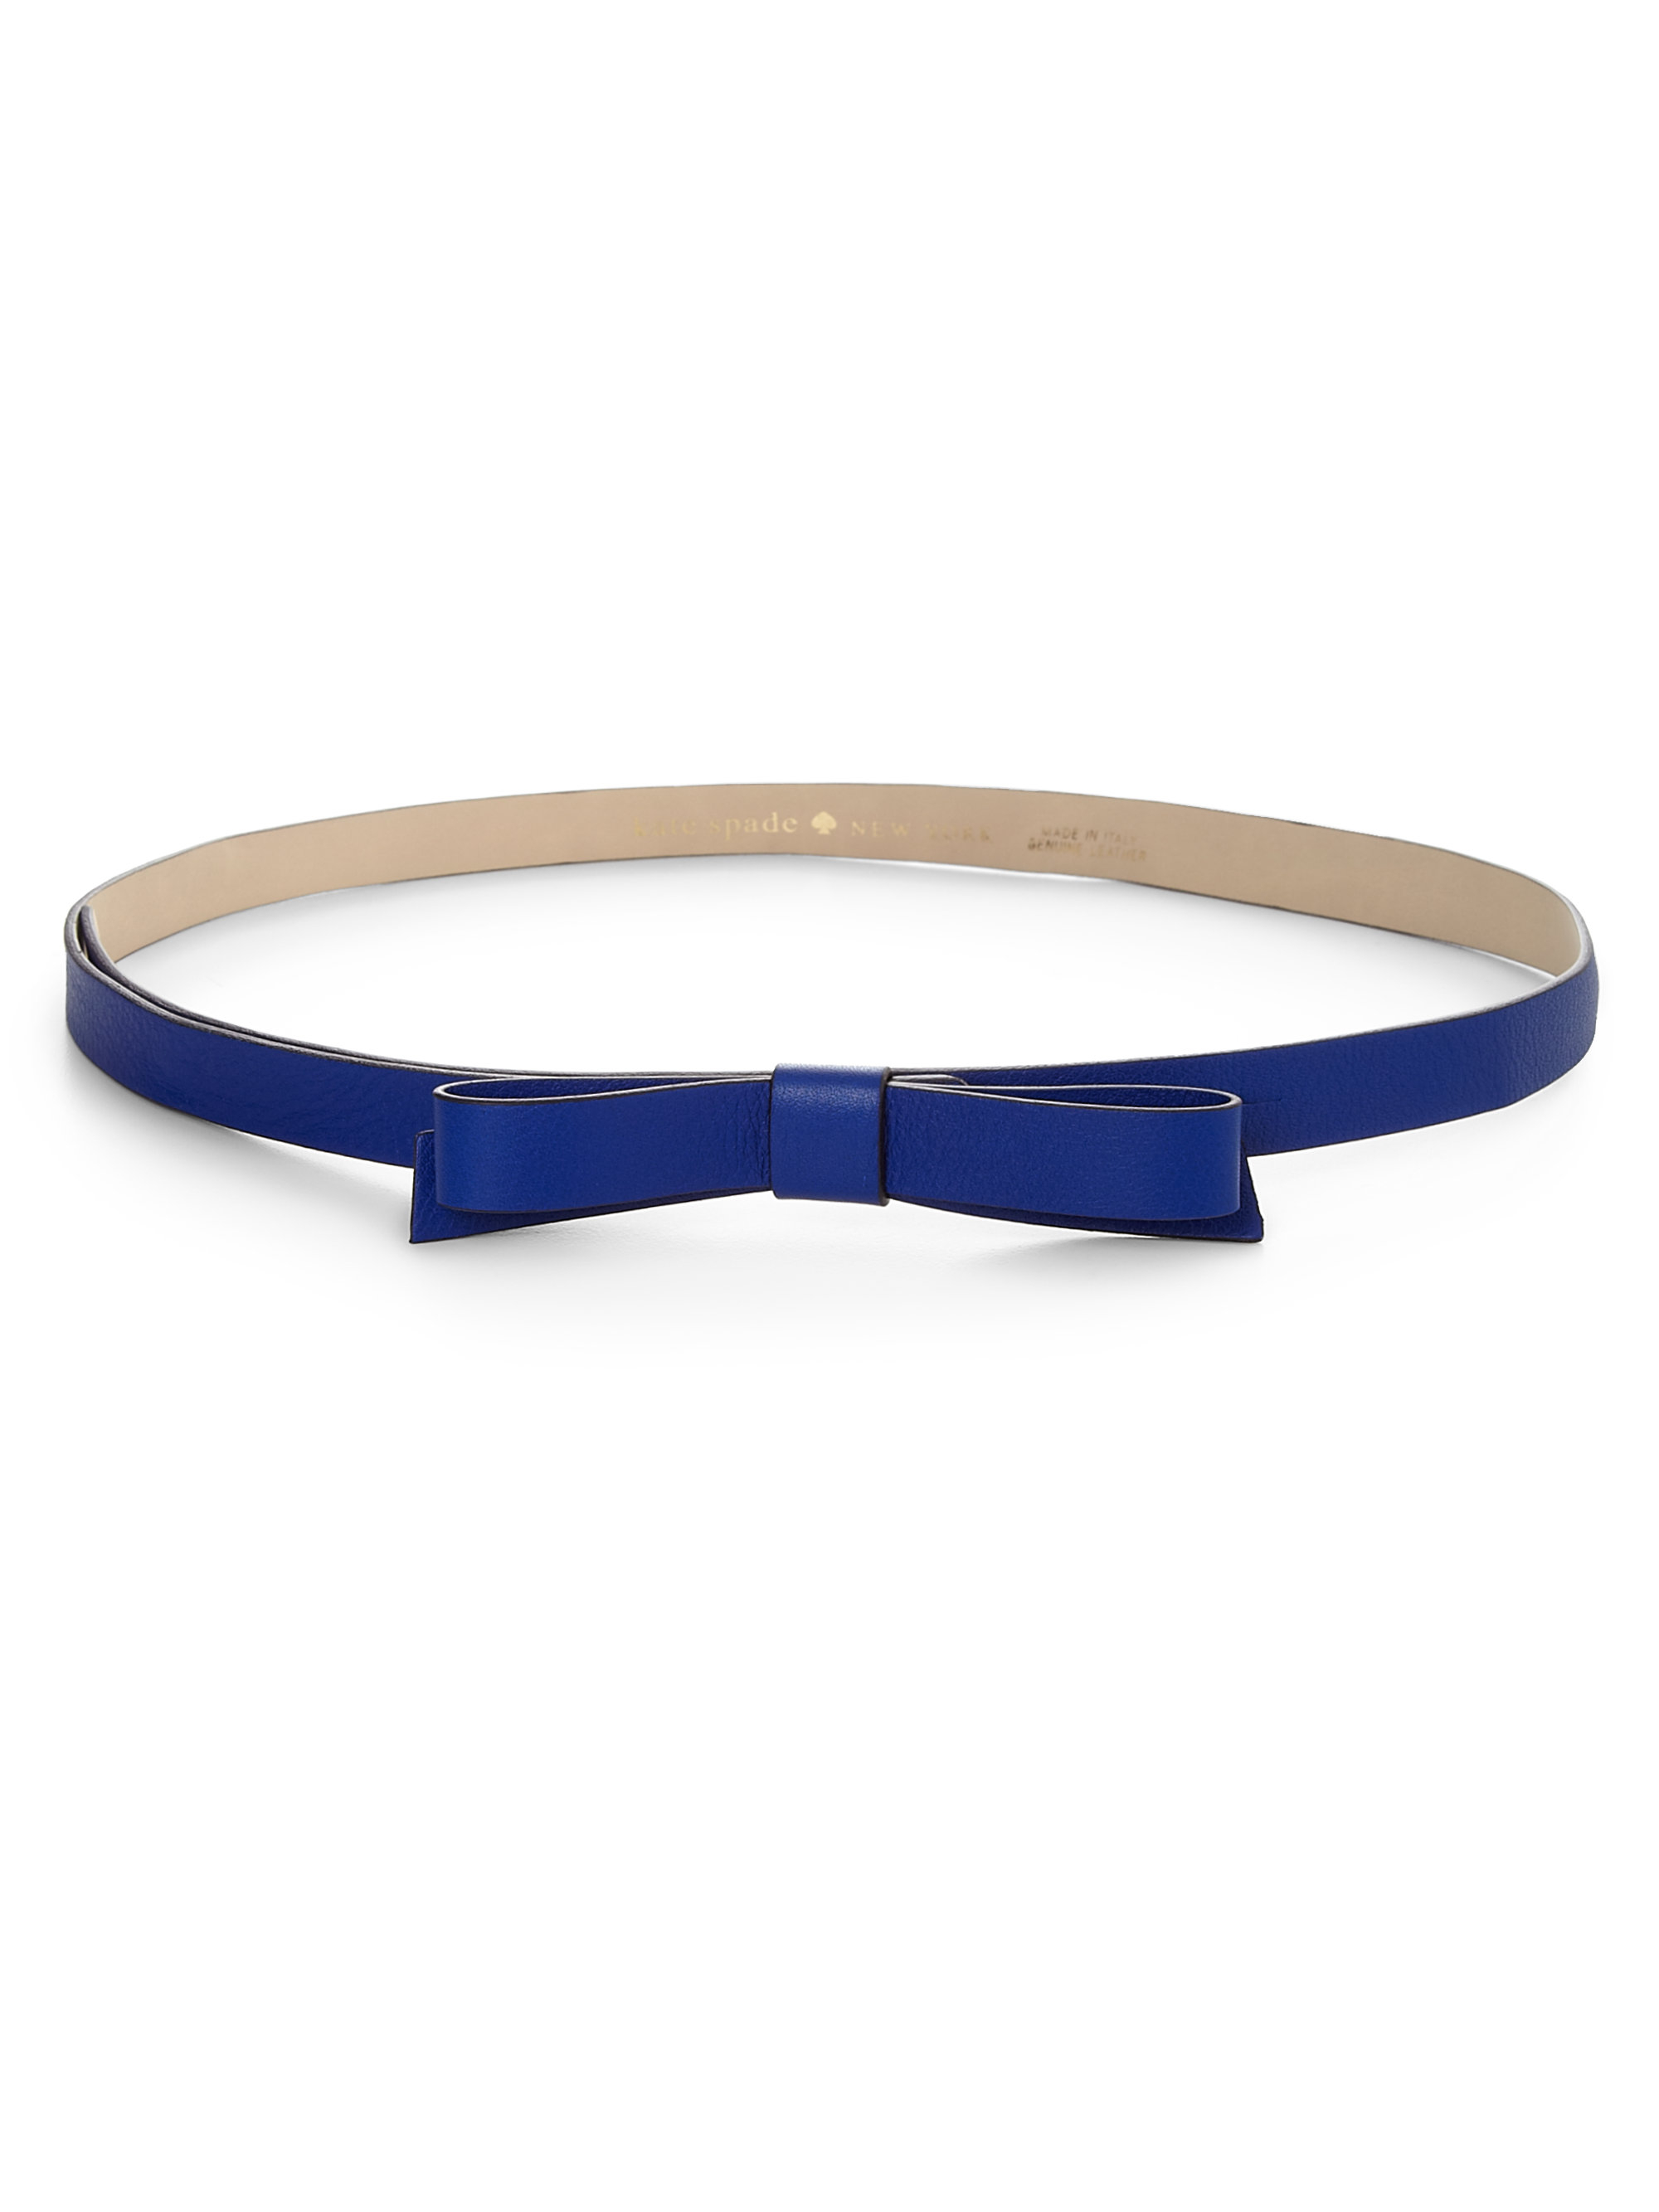 Lyst - Kate spade new york Bow Leather Belt in Blue